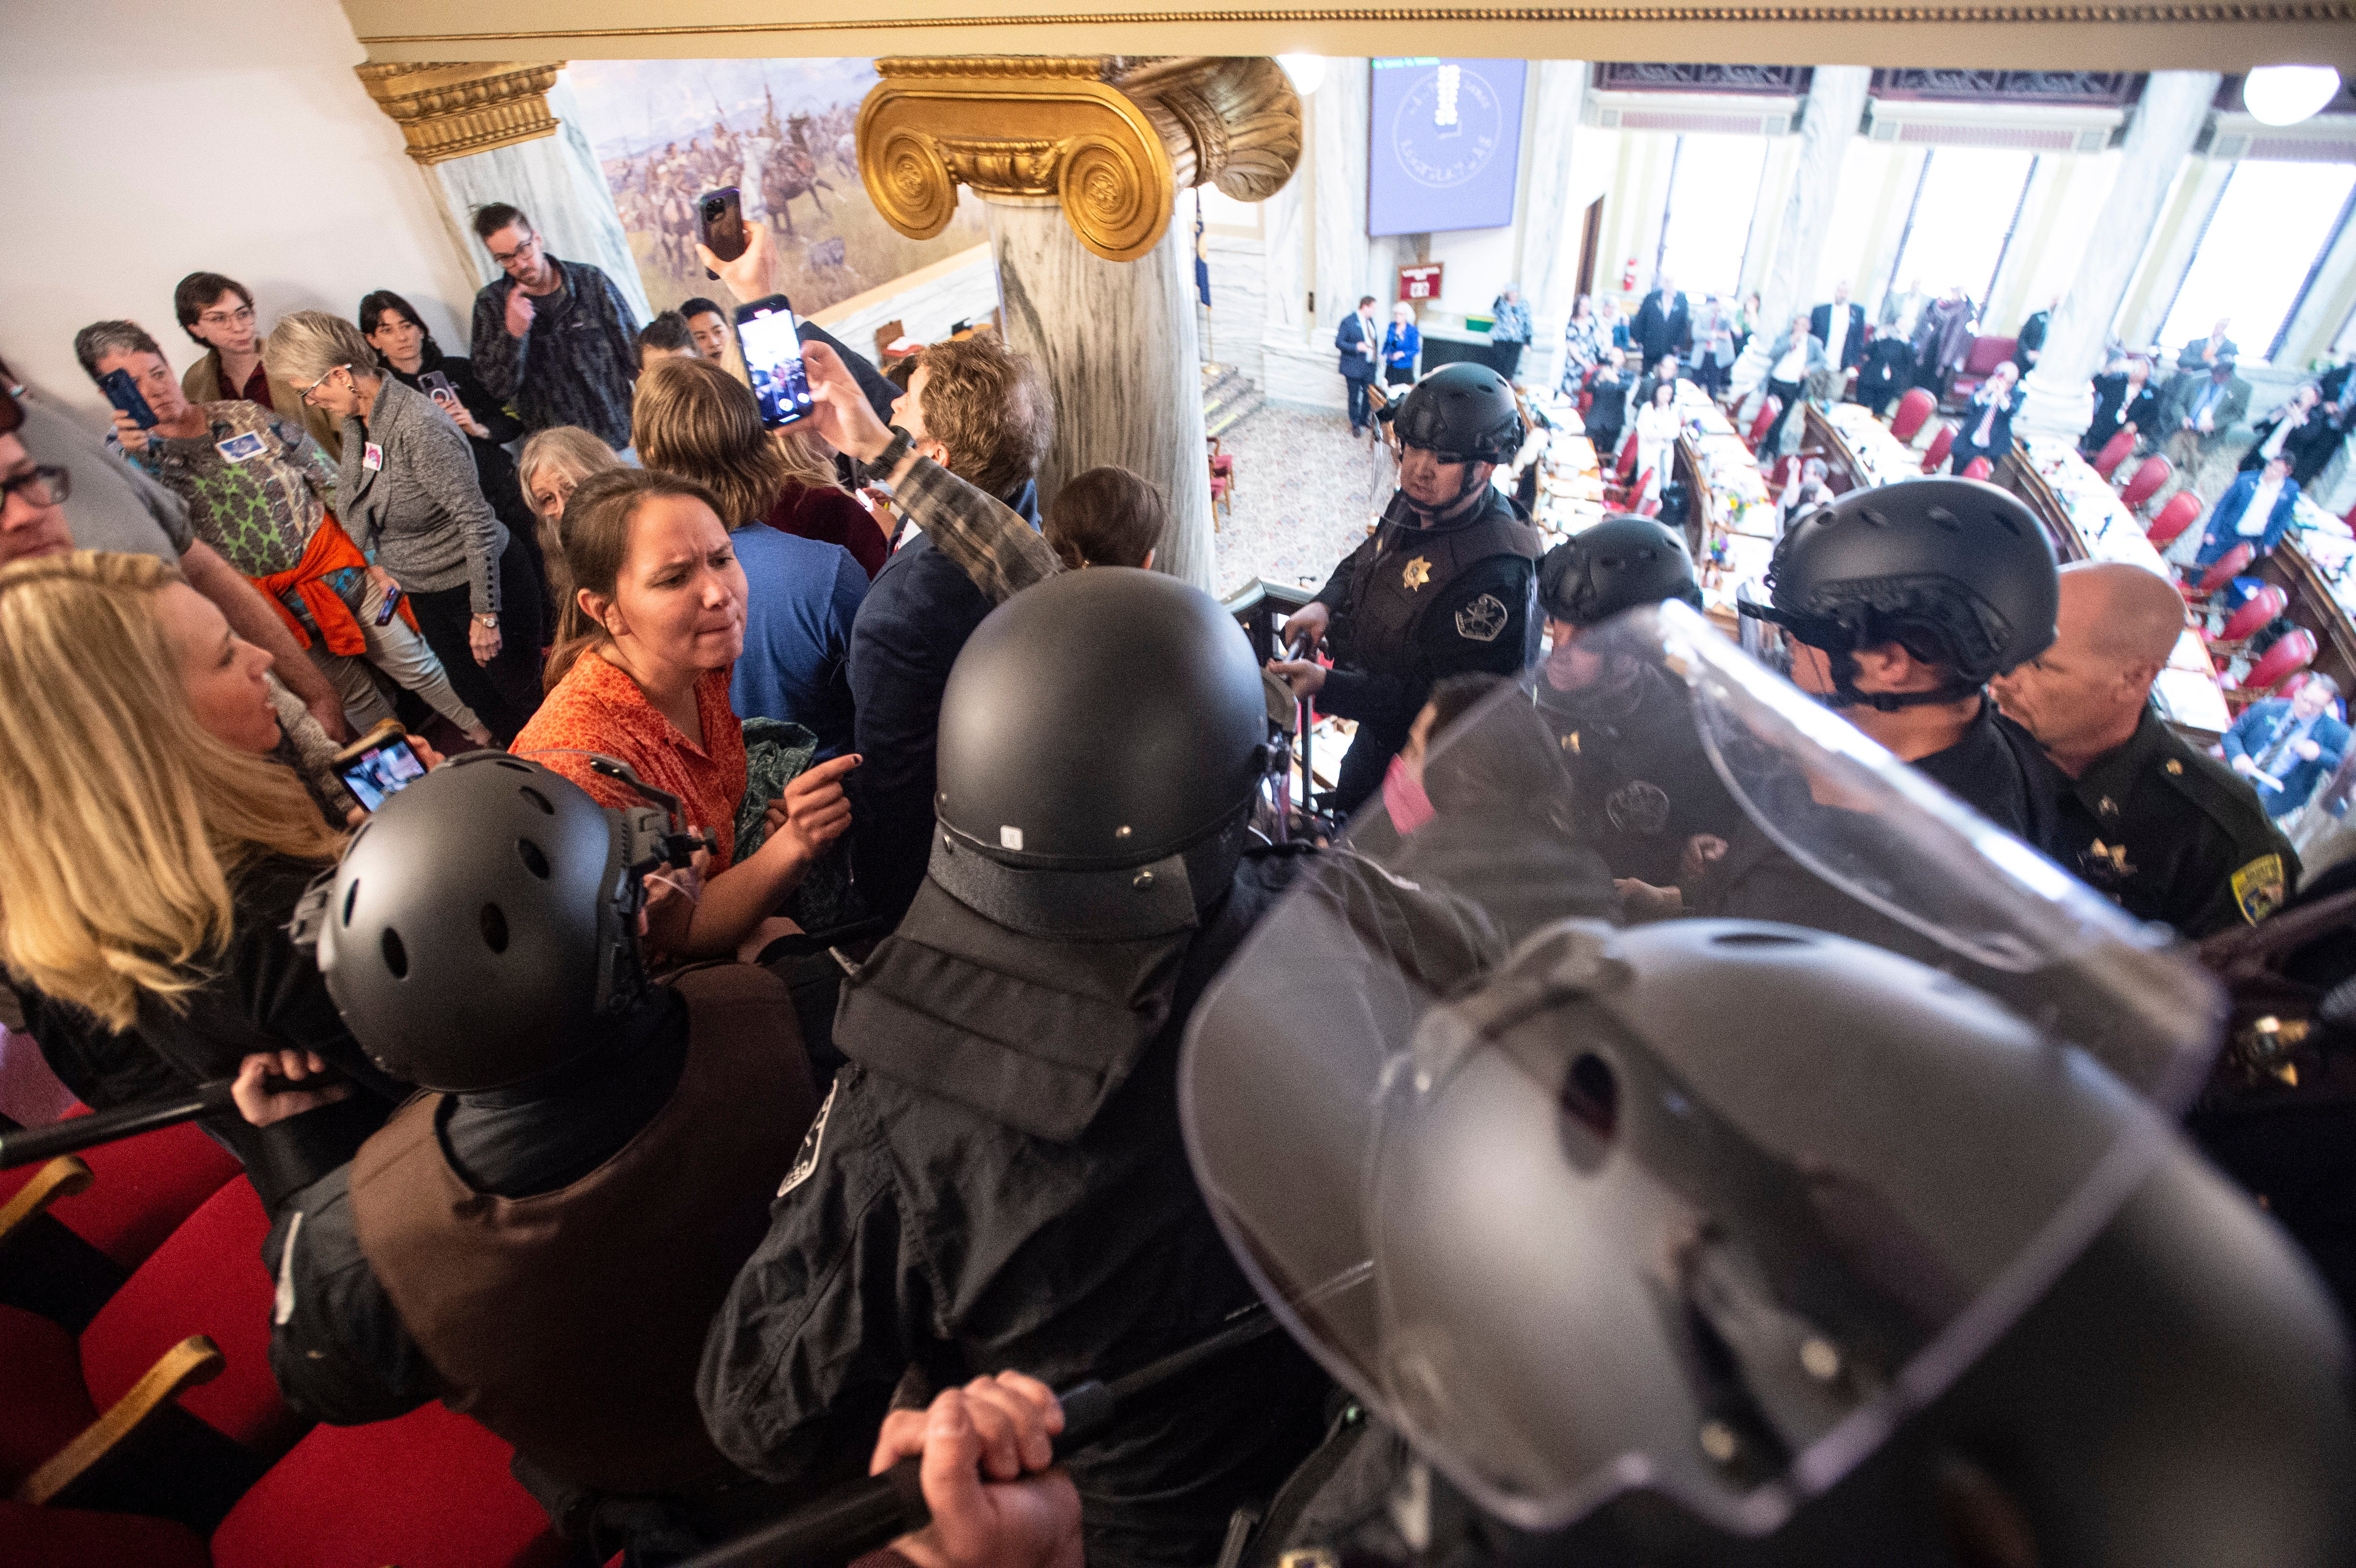 Law enforcement forcibly clear the Montana House of Representatives gallery during a protest after the Speaker of the House refused again to acknowledge Rep Zephyr